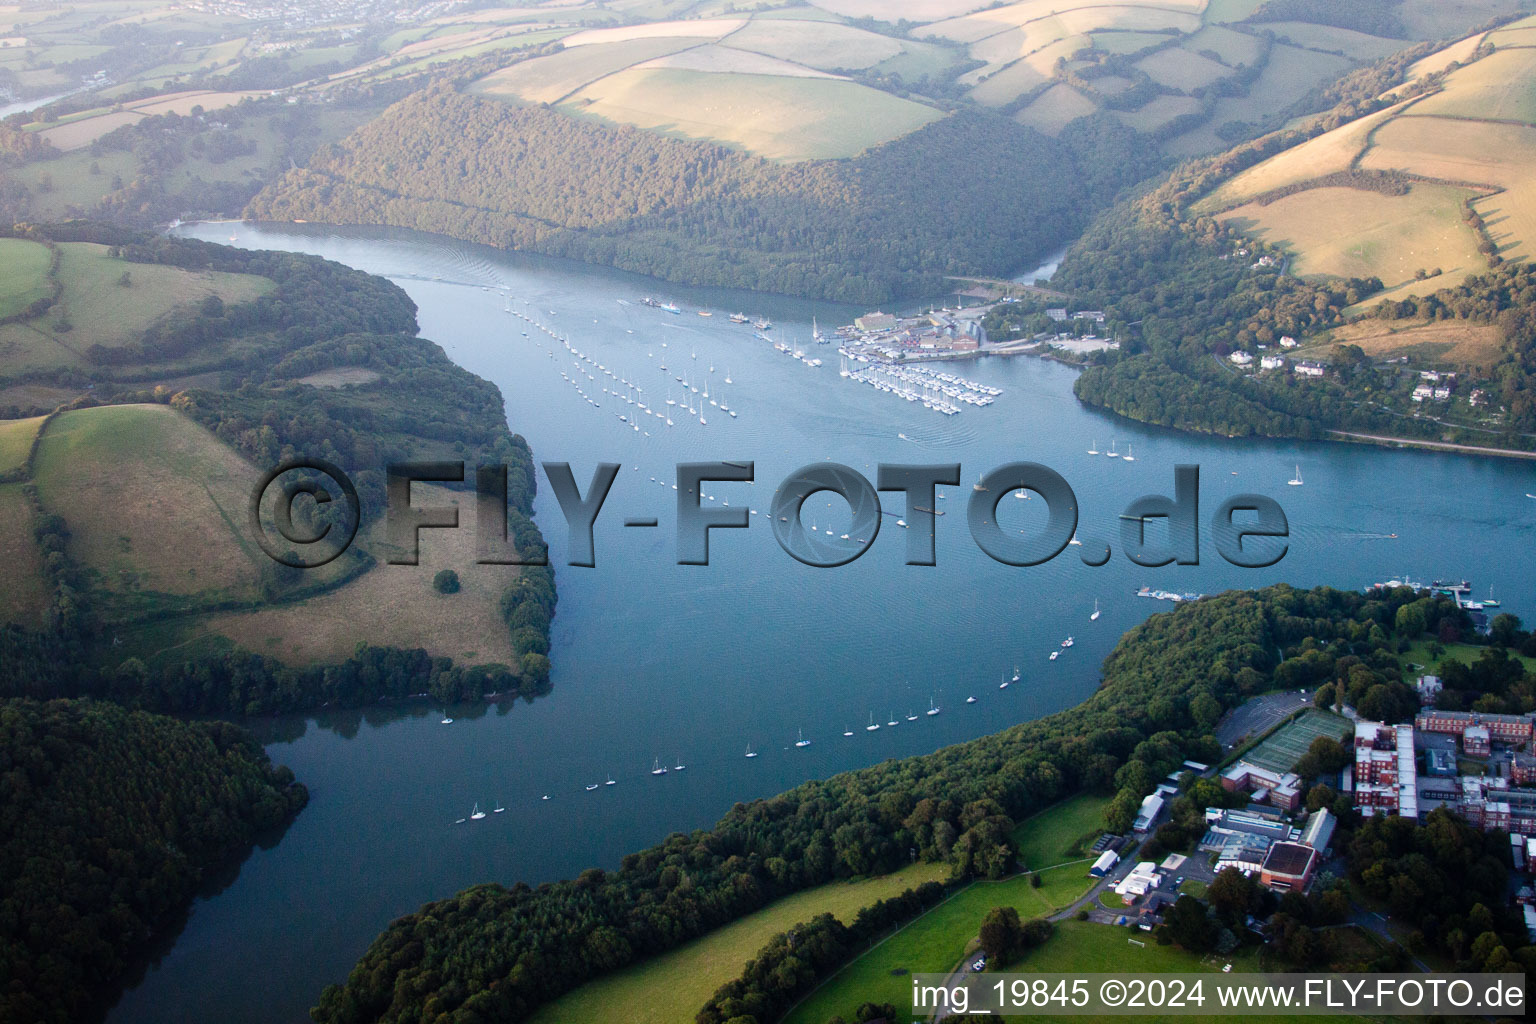 Aerial view of Riparian areas along the river mouth of Dart river in Dartmouth in England, United Kingdom